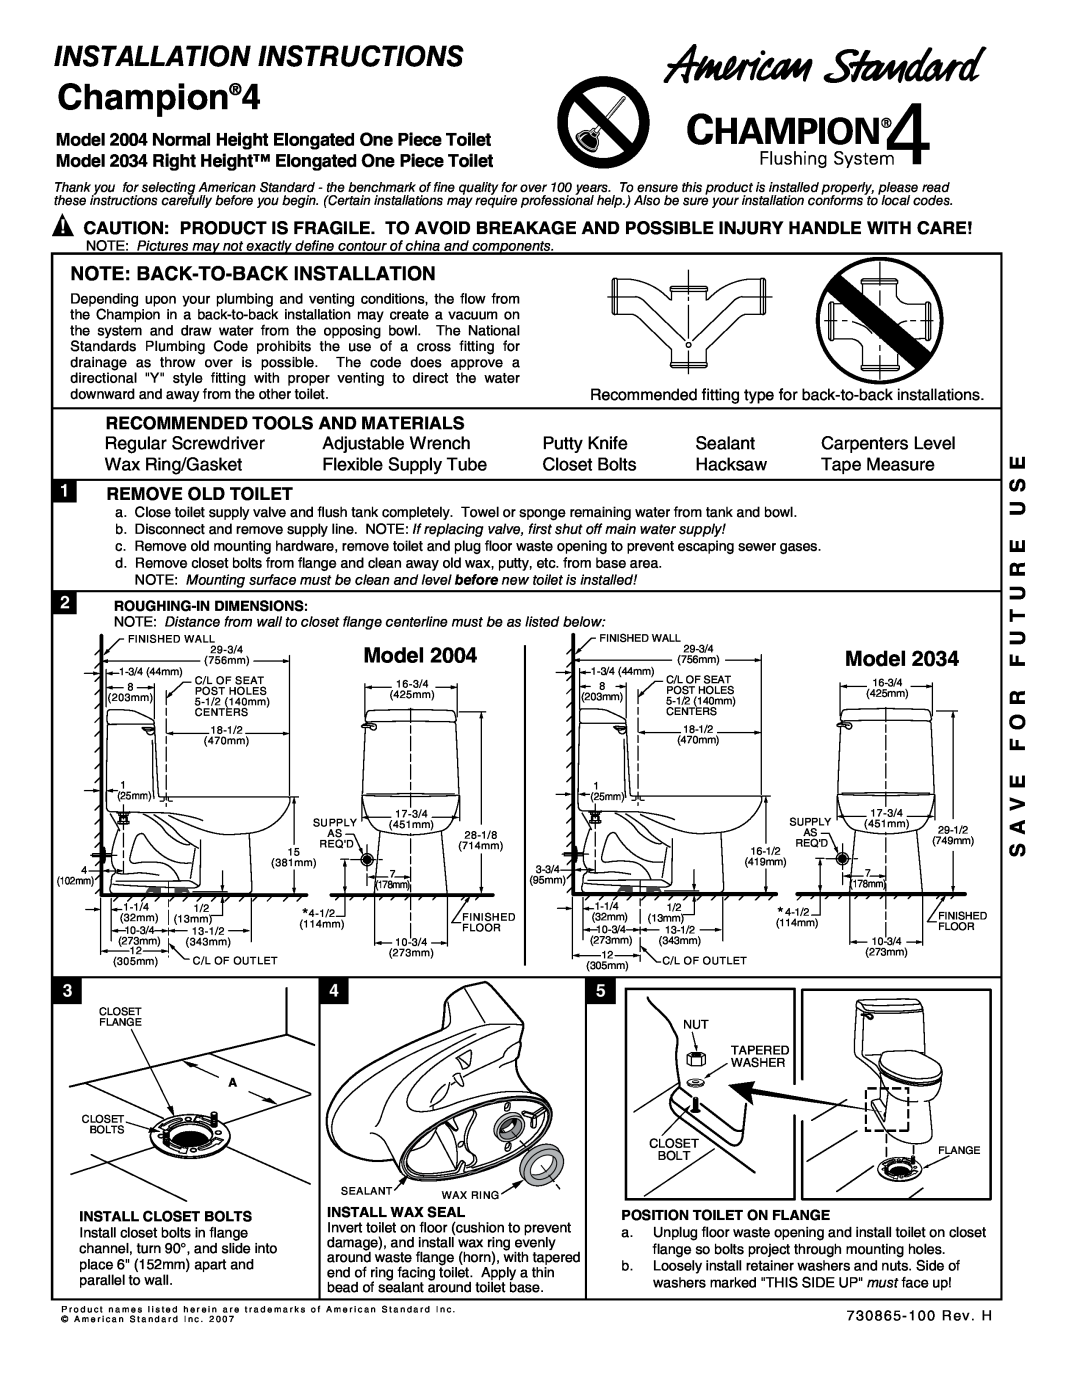 American Standard 2003 installation instructions Recommended Tools And Materials, 1REMOVE OLD TOILET, Champion4, Model 